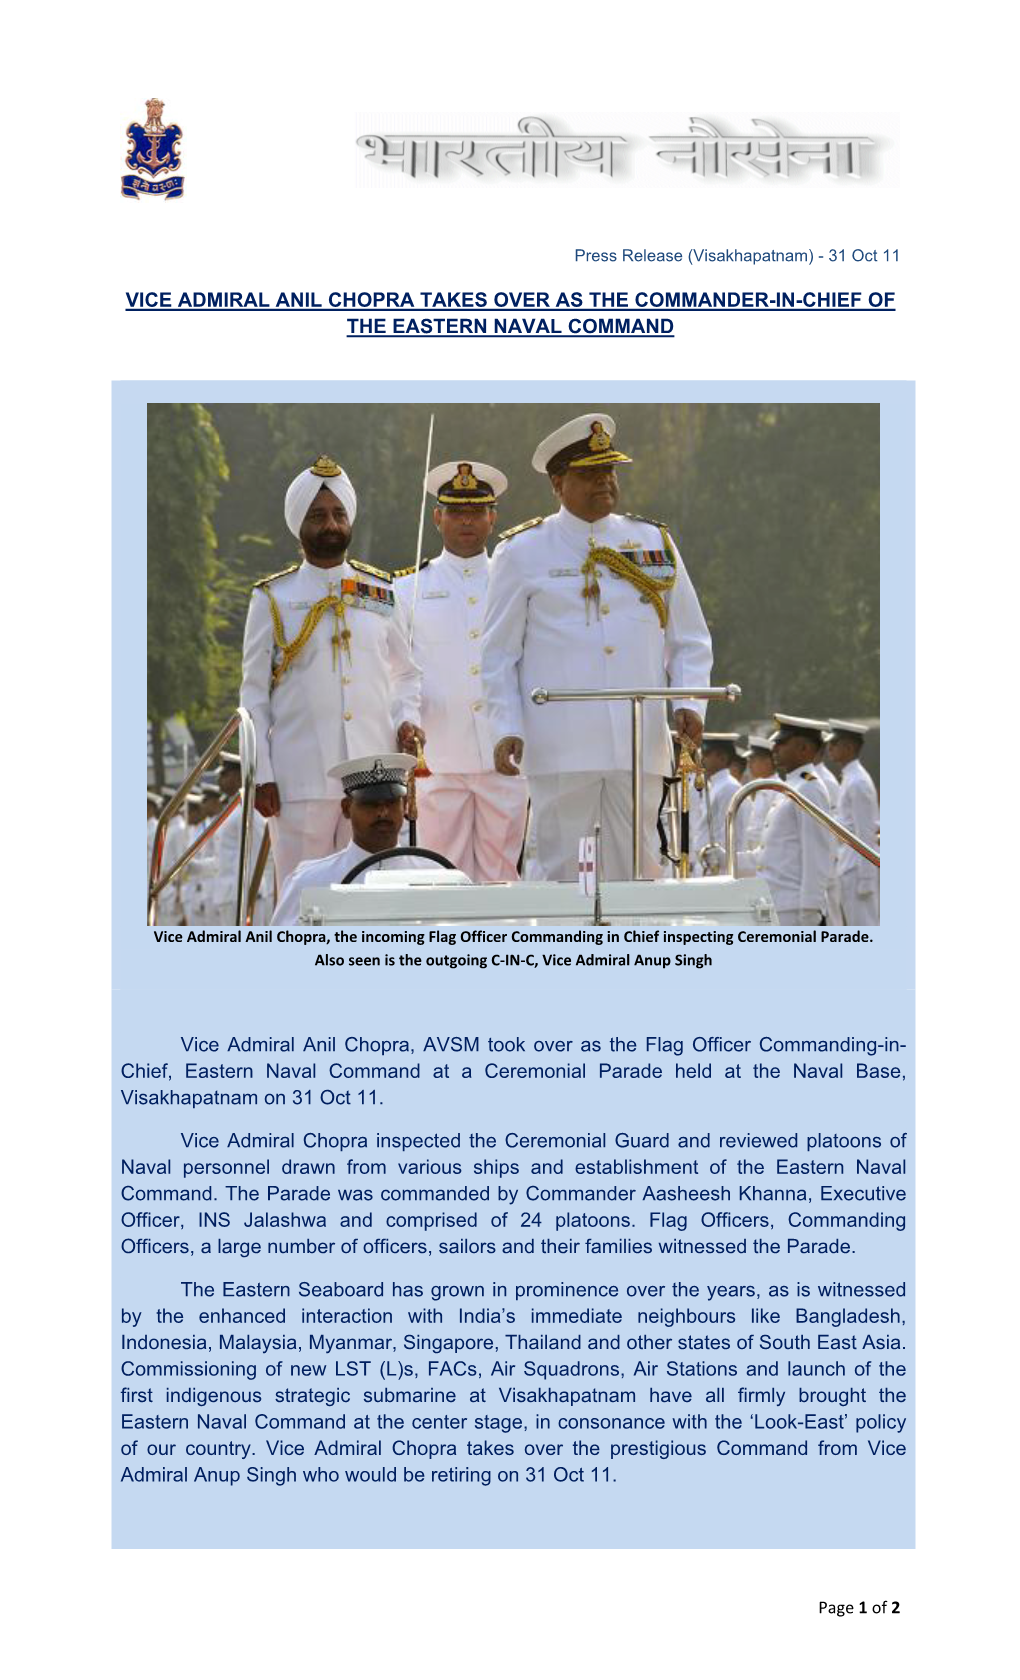 Vice Admiral Anil Chopra Takes Over As the Commander-In-Chief of the Eastern Naval Command